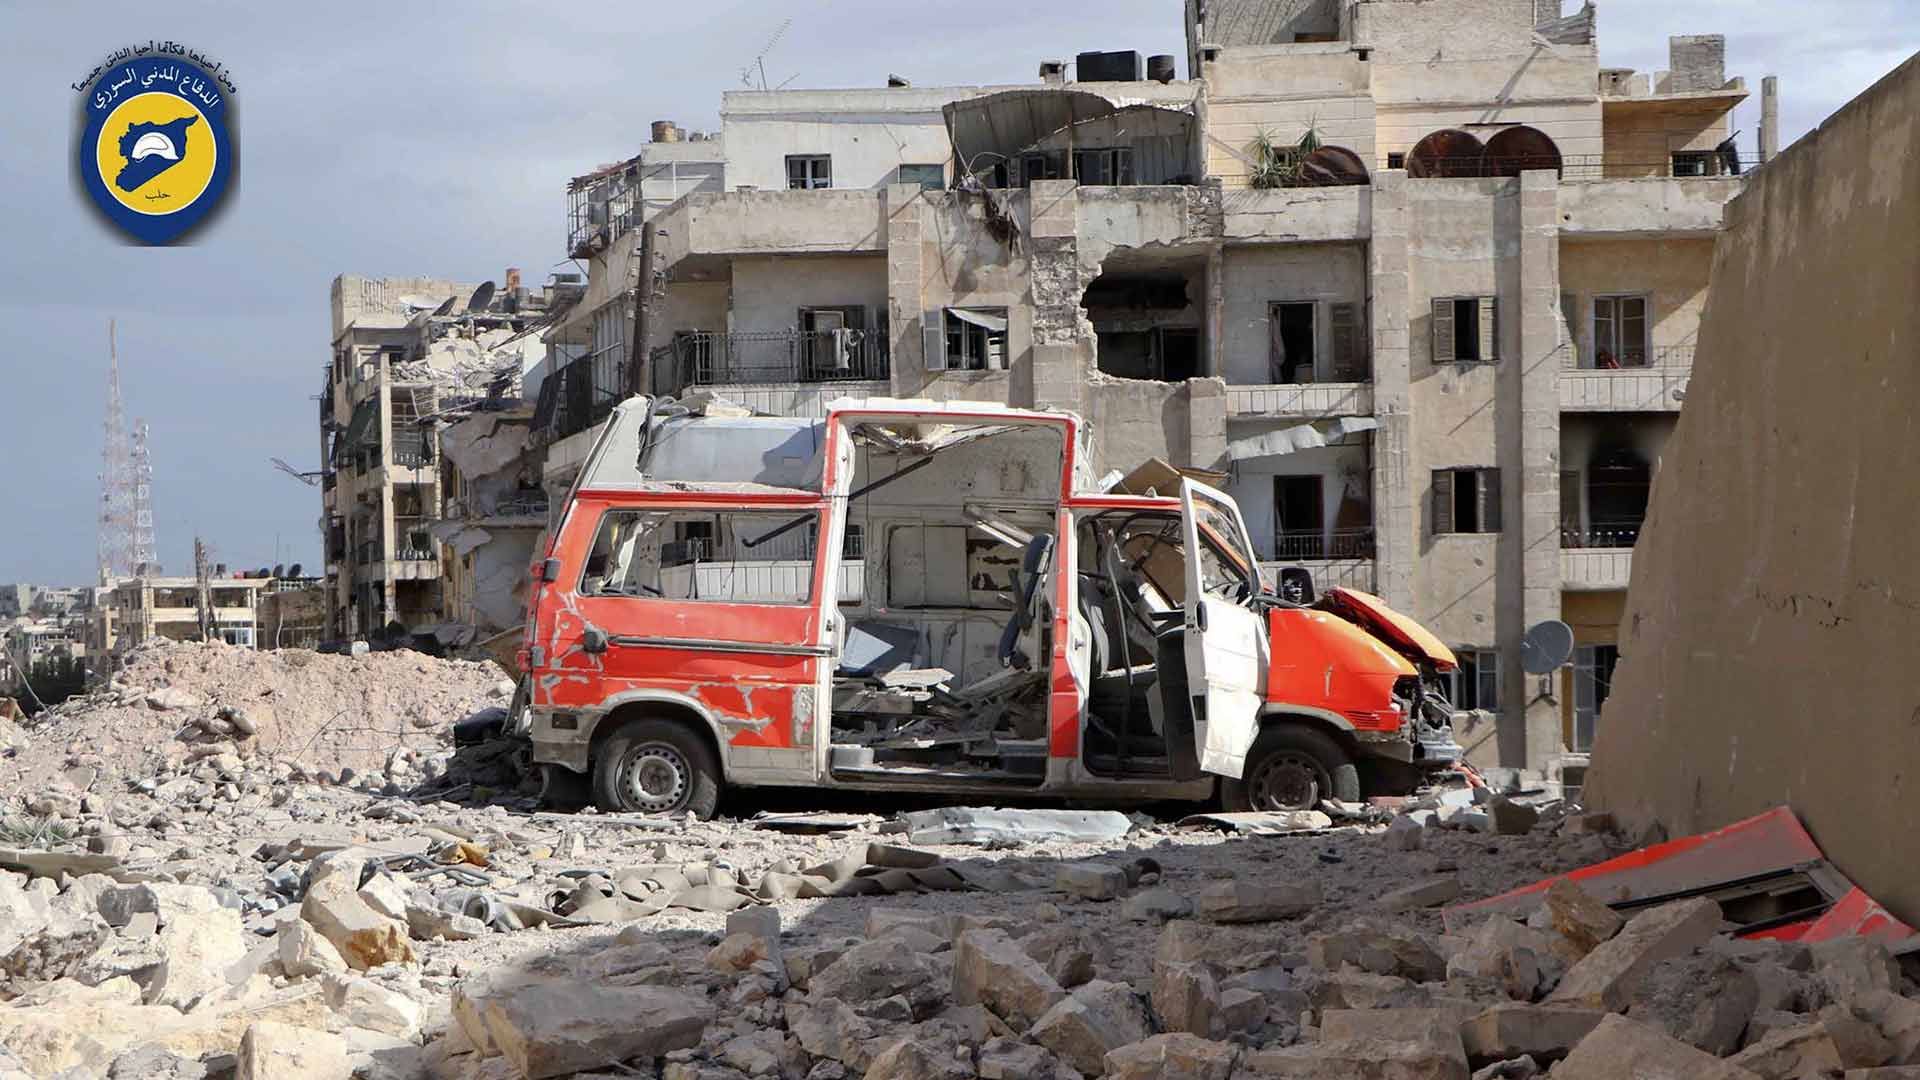 In this photo provided by the Syrian Civil Defense group known as the White Helmets, taken Sept. 23, 2016, a destroyed ambulance is seen outside the Syrian Civil Defense main center after airstrikes in Ansari neighborhood in the rebel-held part of eastern Aleppo, Syria. (Syrian Civil Defense White Helmets via AP)